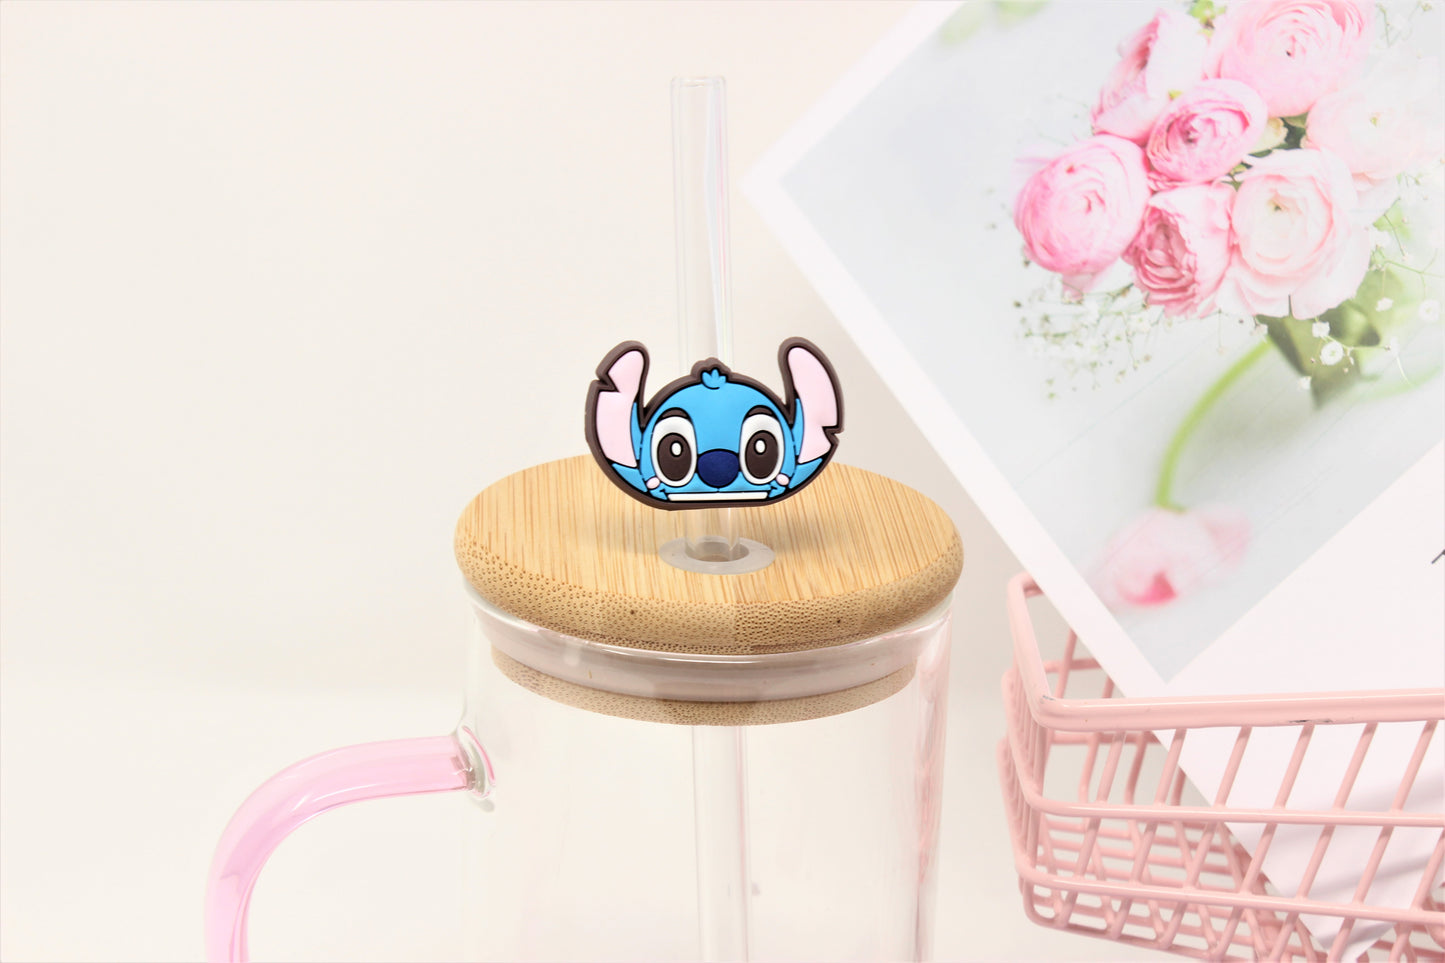 Straw toppers are now available!!! #liloandstitch #stitch #pumpkinsti